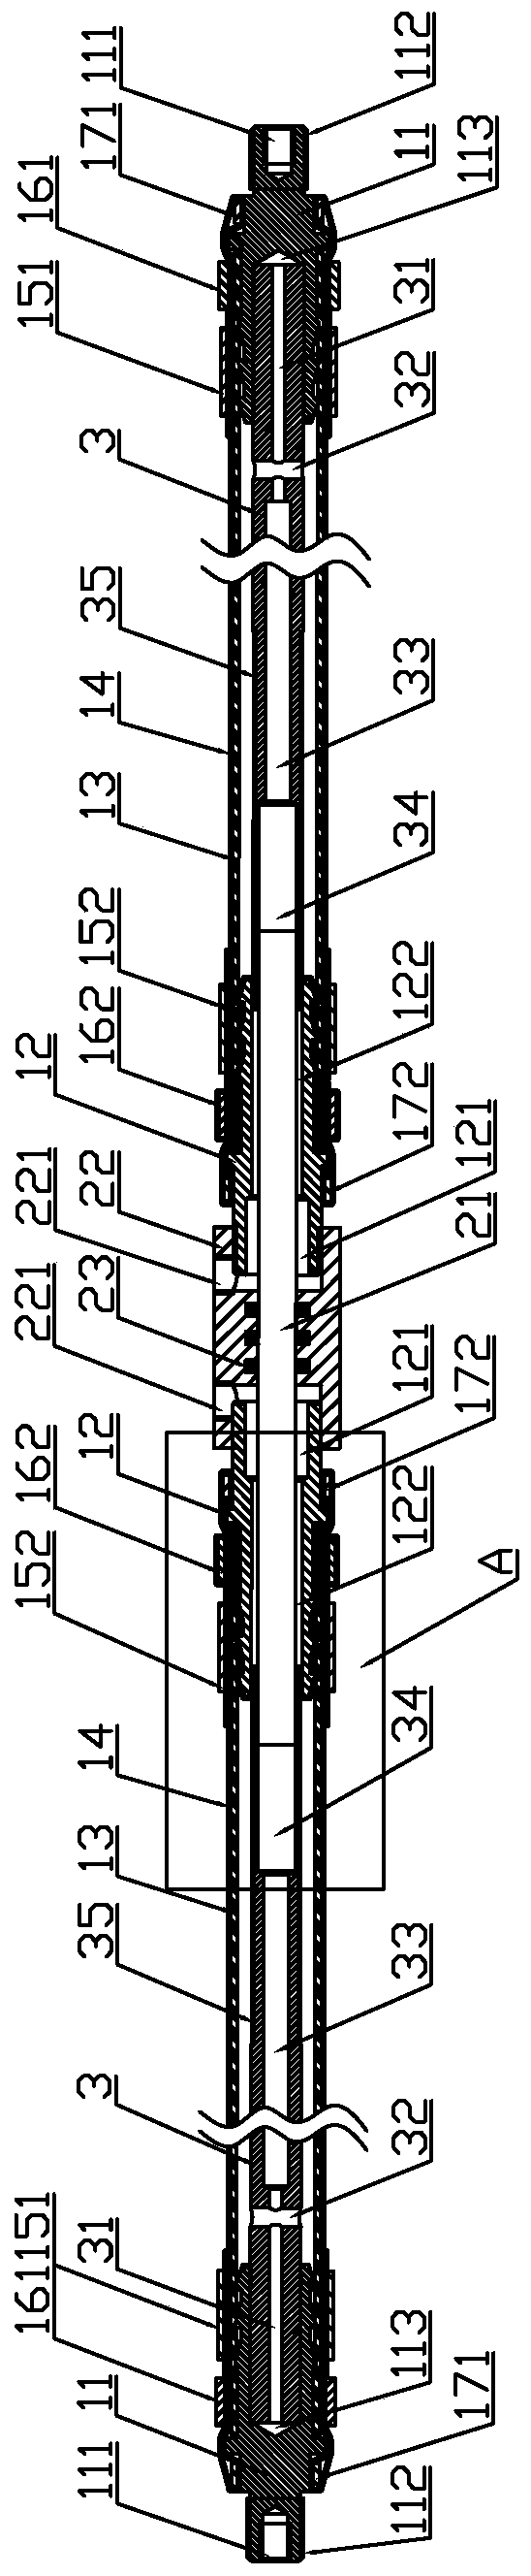 Double-acting hydraulic artificial muscle linear reciprocating actuator